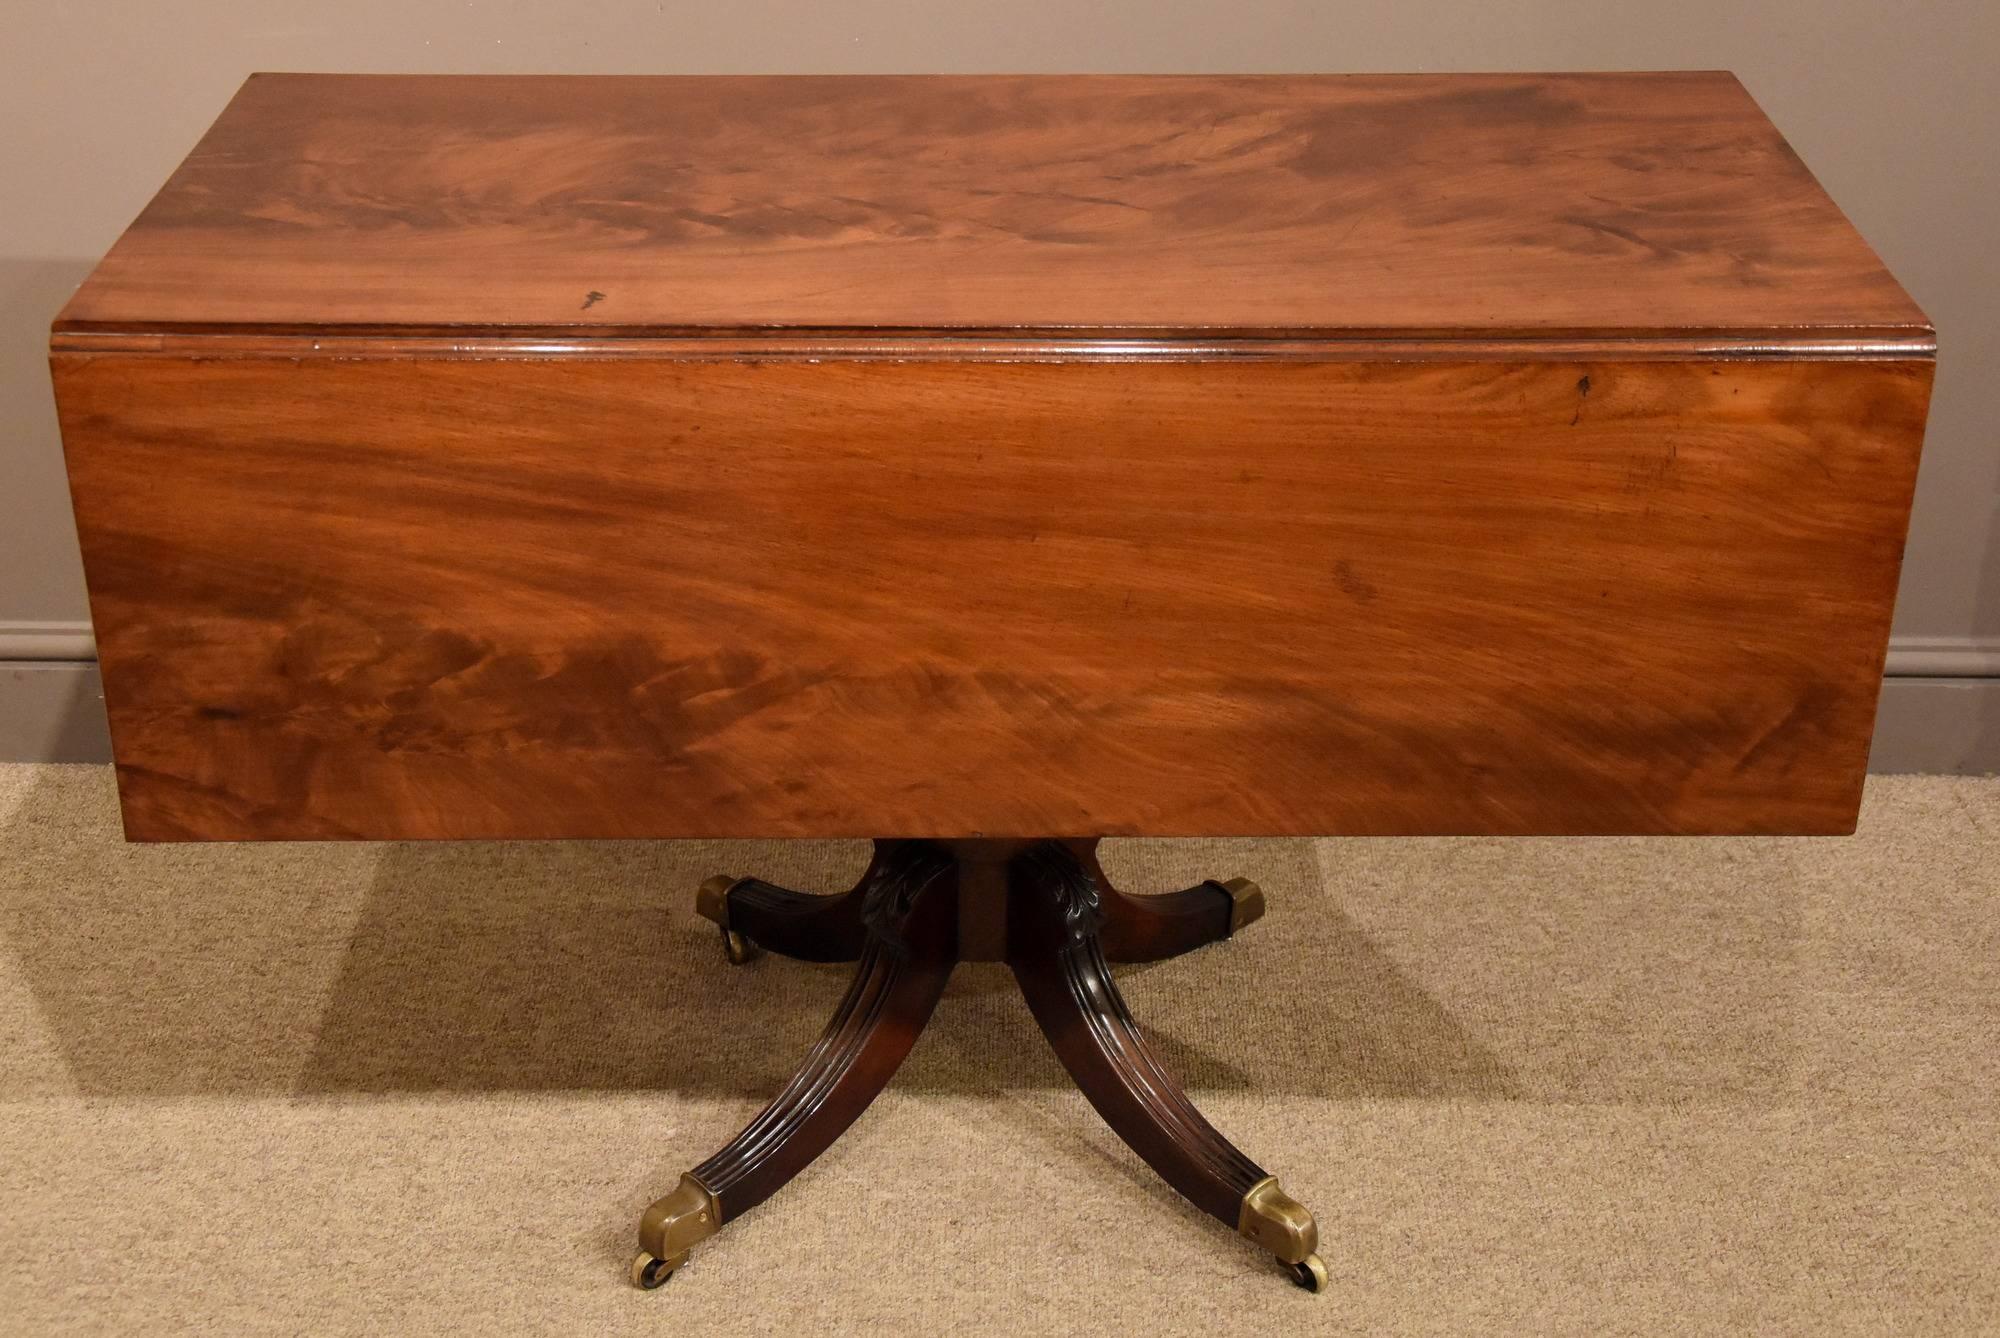 Early 19th Century Elegant Regency Period Mahogany Pembroke Table with Flamed Timber For Sale